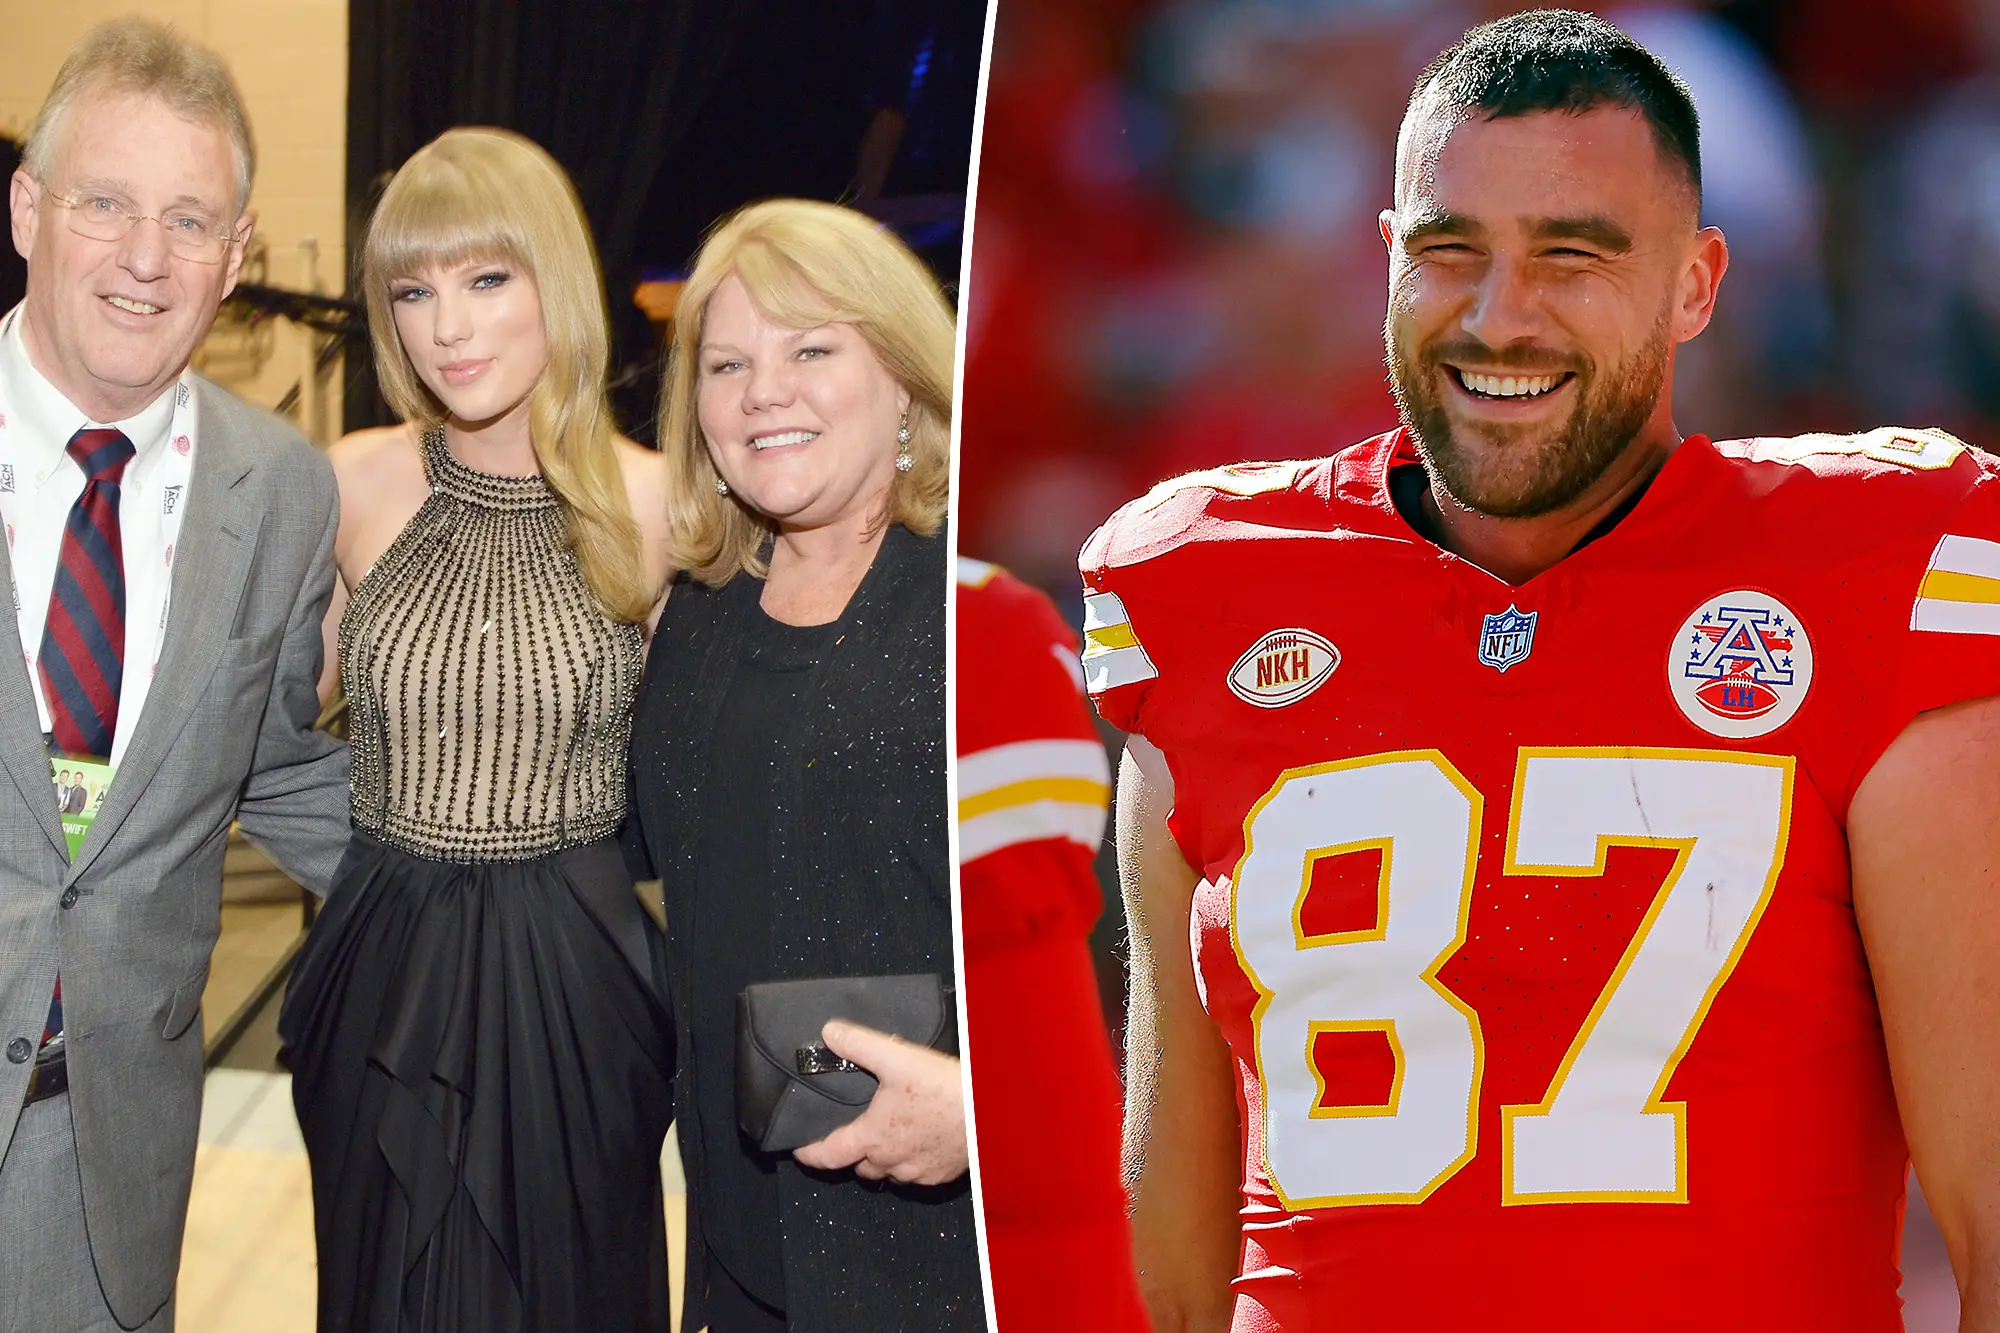 Taylor Swift Mom disclosed "Taylor and Travis rang in 2024 with a promise they will marry, but agreed it's 'too soon to go public' and make it official''